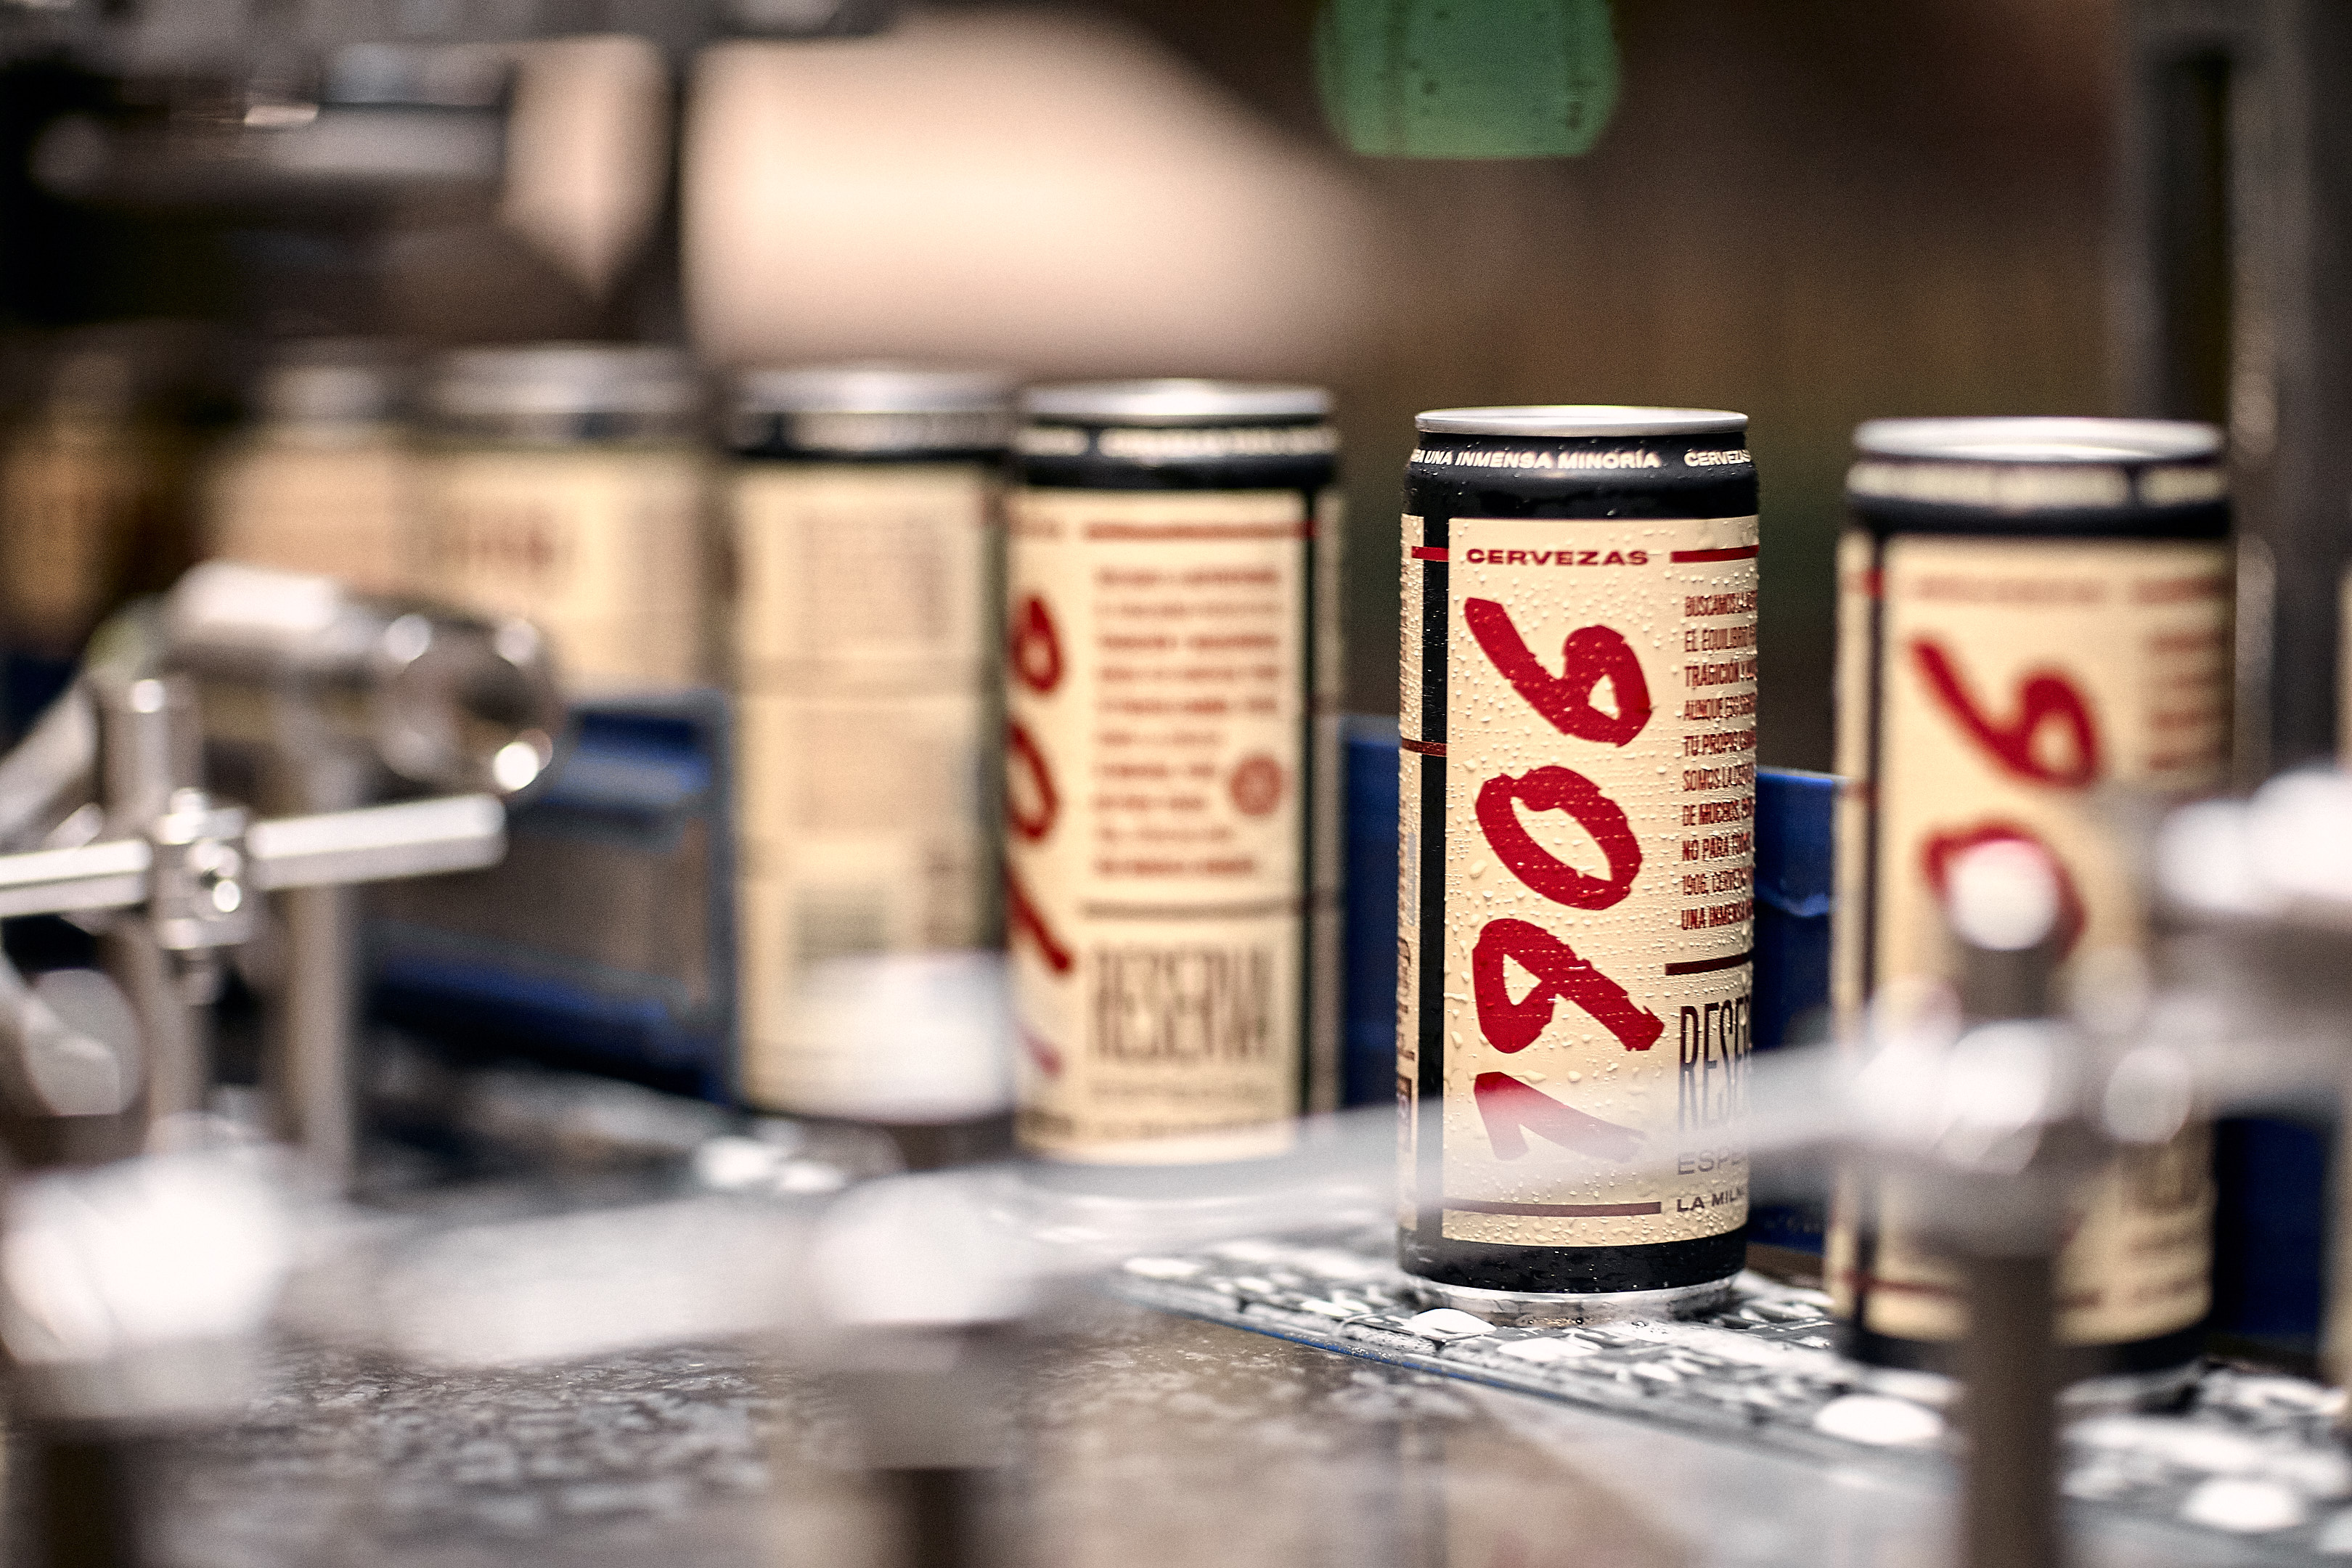 Cervezas 1906 - Full brand restyling and packaging design by Costa - Creative Work - $i